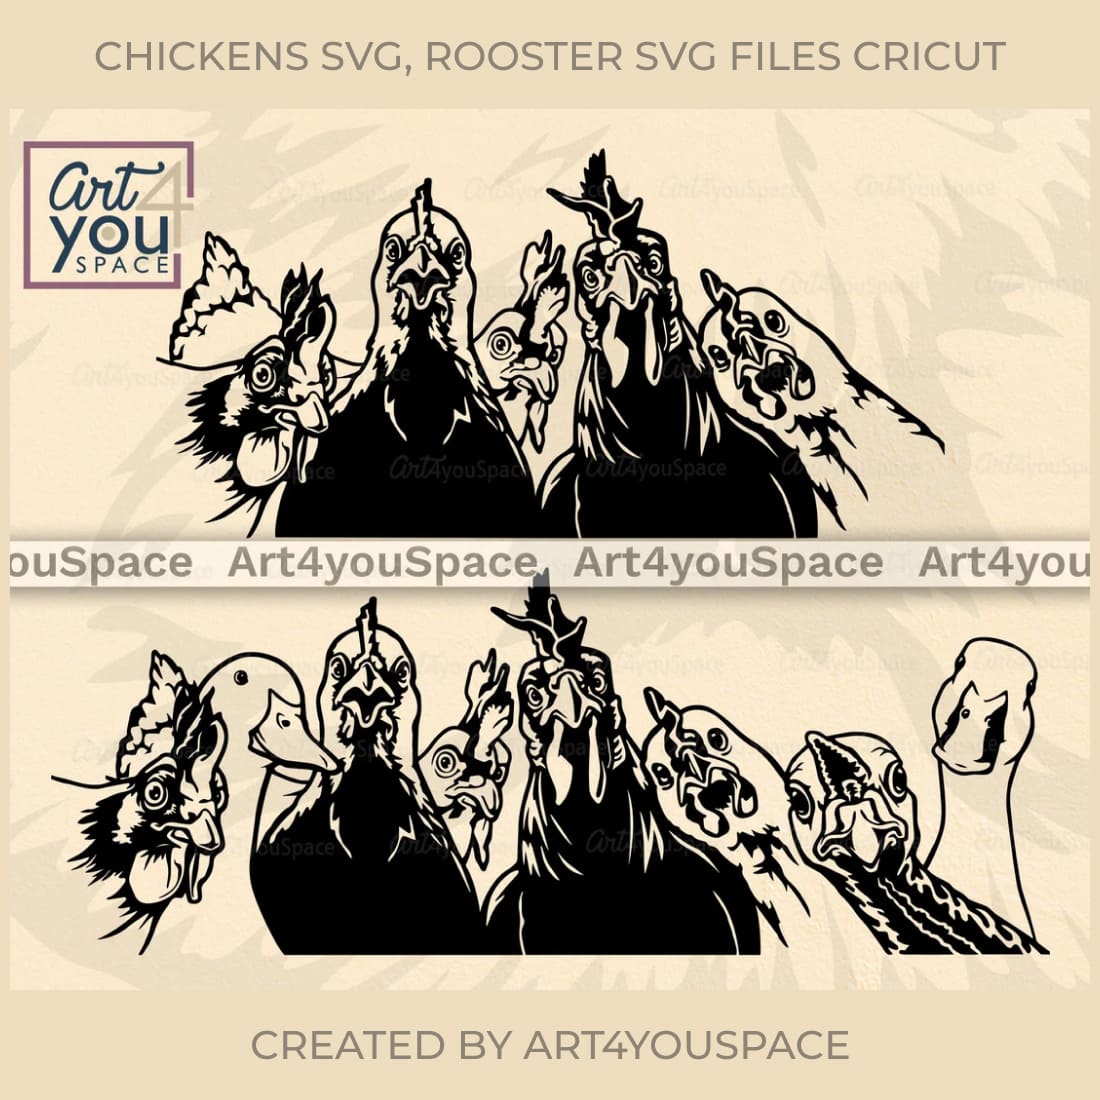 chickens svg rooster svg files cricut cover image.